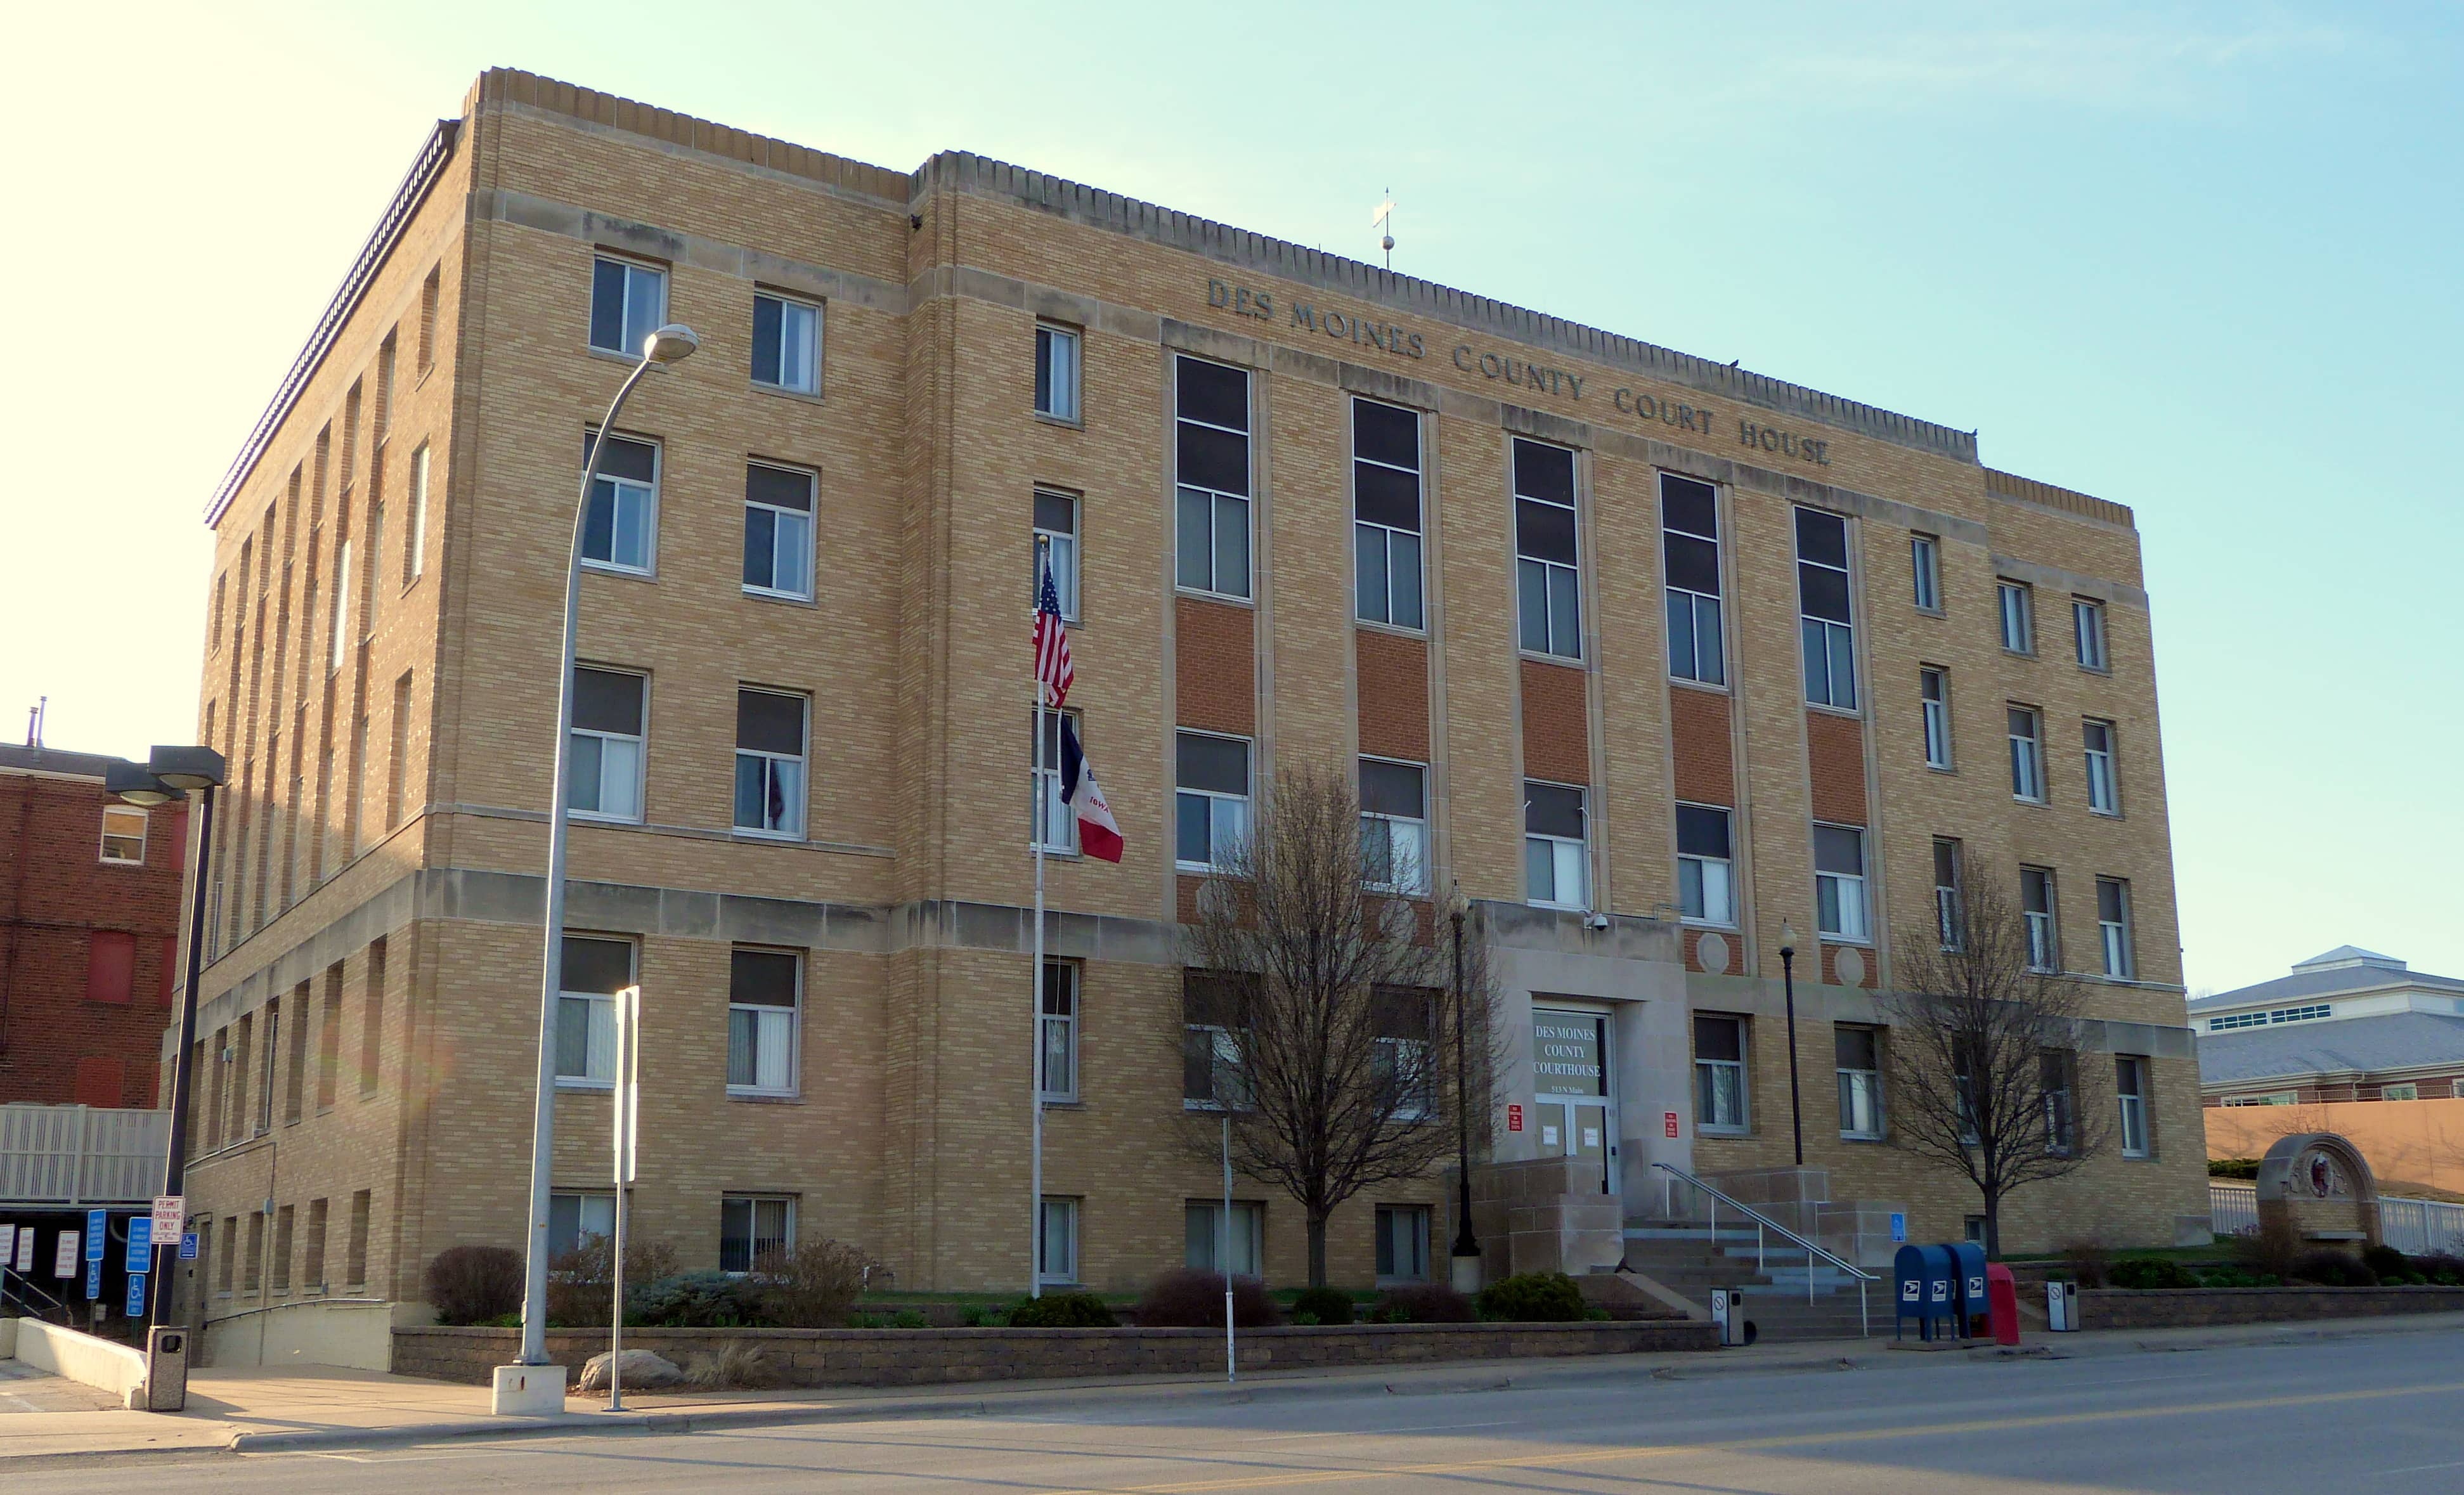 Image of Des Moines County Auditor Des Moines County Courthouse